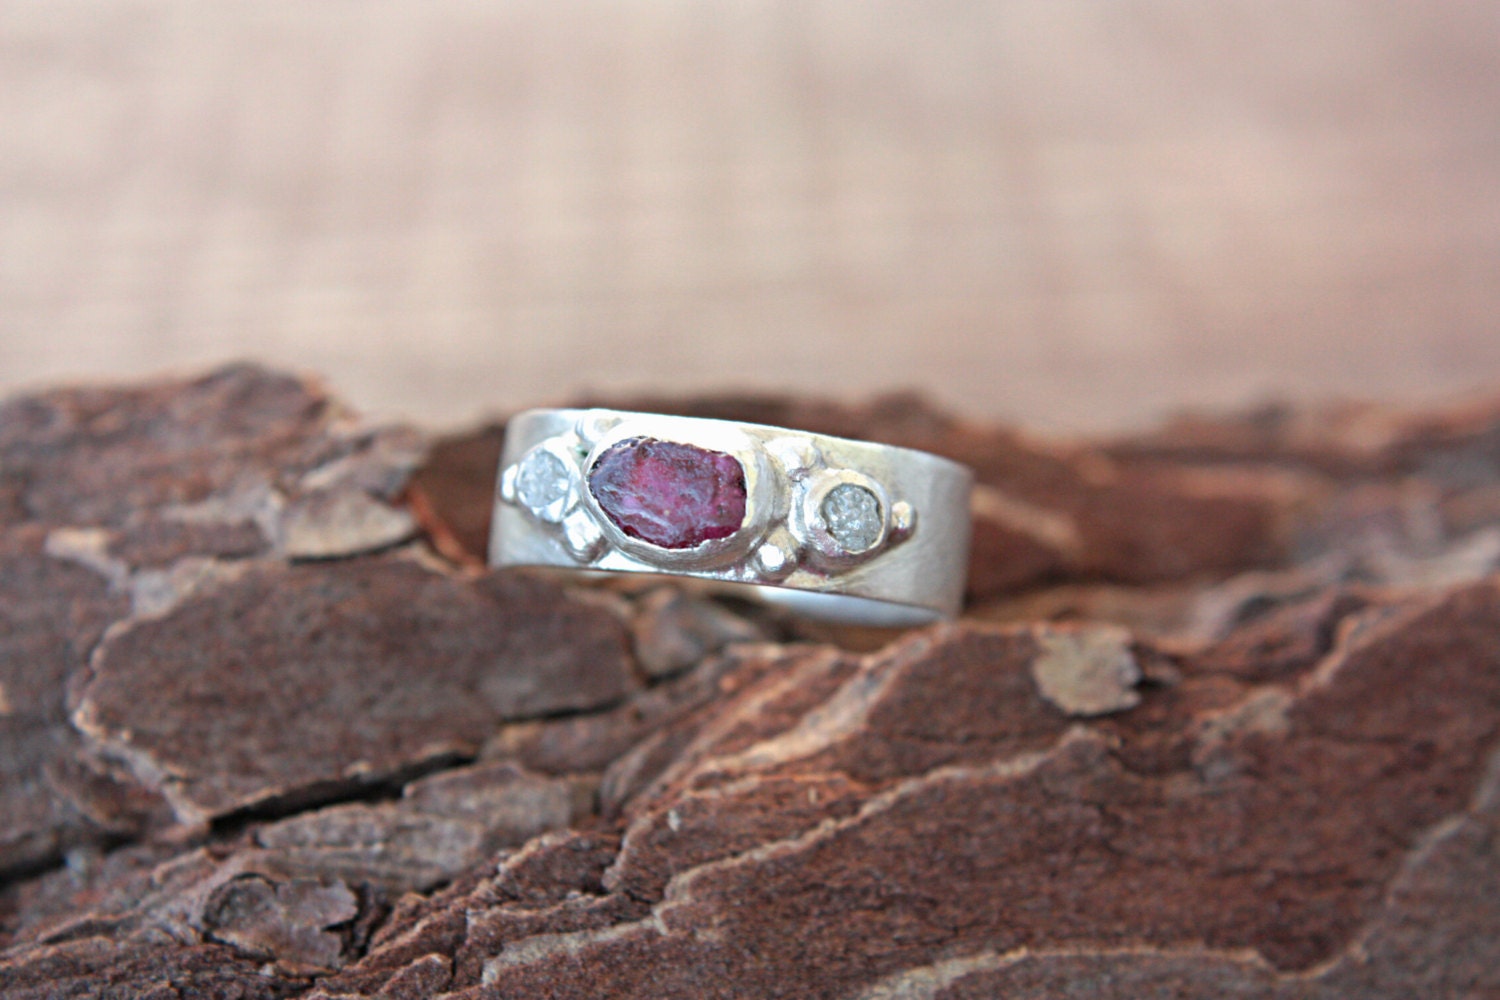 Rough Diamonds Rough Ruby Ring Sterling Silver Raw Diamond Raw Ruby Engagement Ring Size 7 1/4 Silversmithed Metalsmithed - ManariDesign